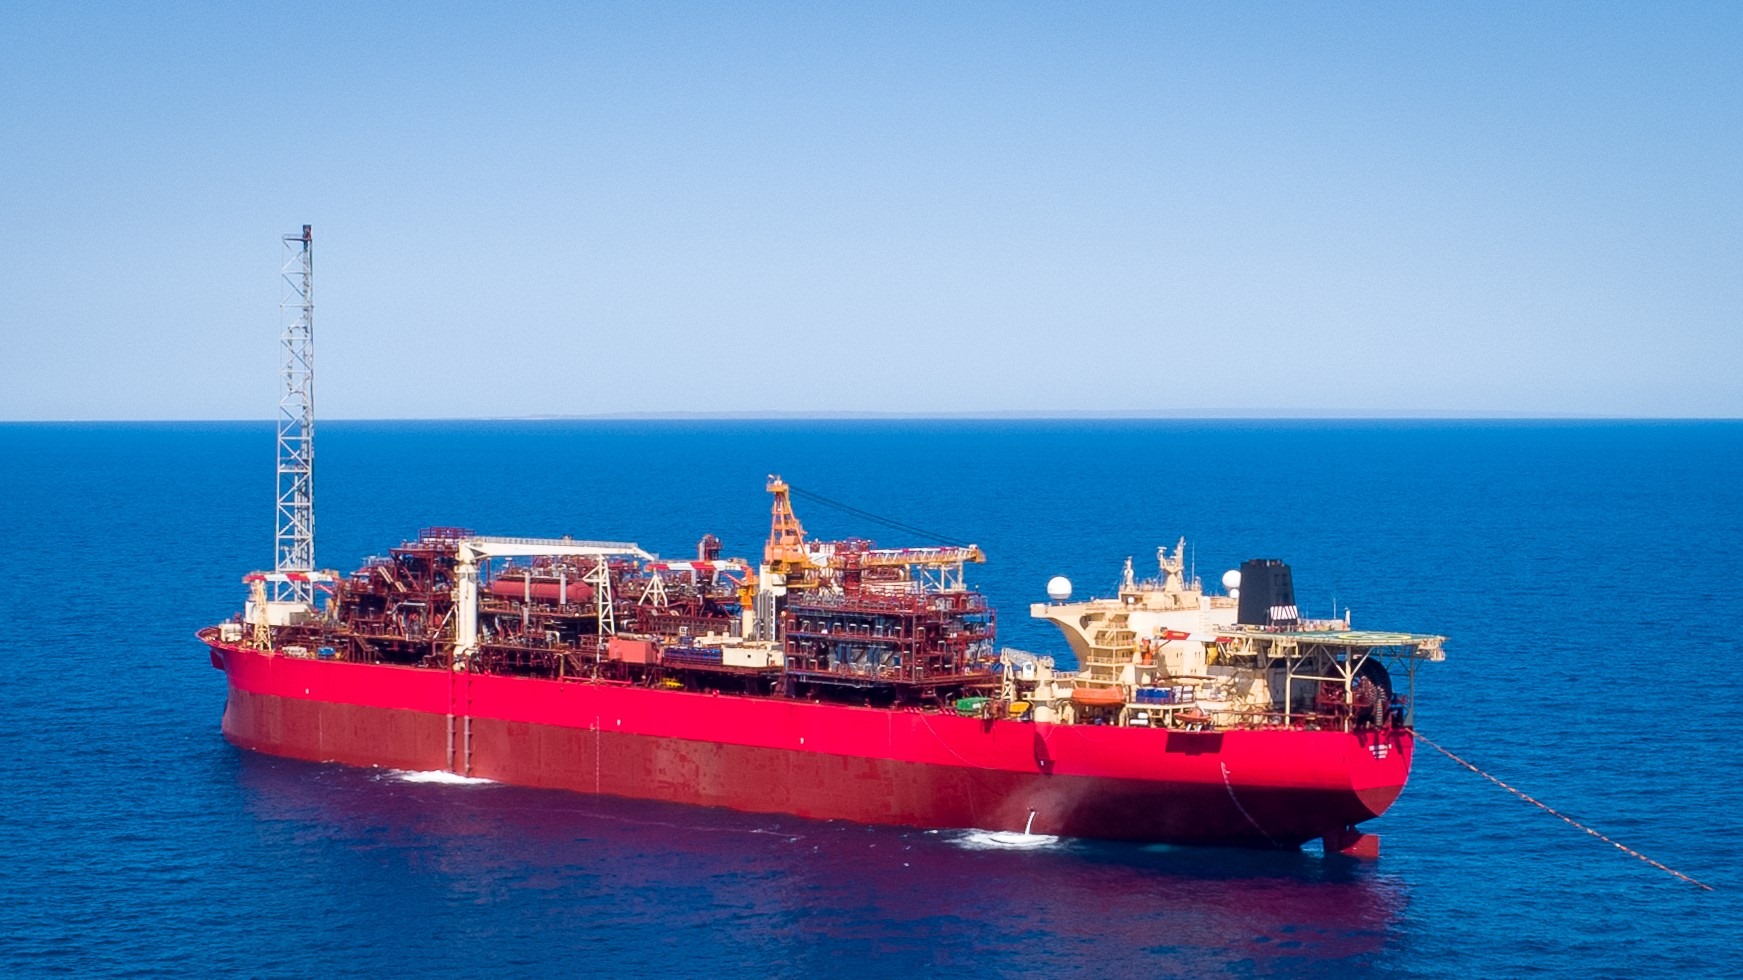 Ngujima-Yin FPSO of the Vincent oil field.